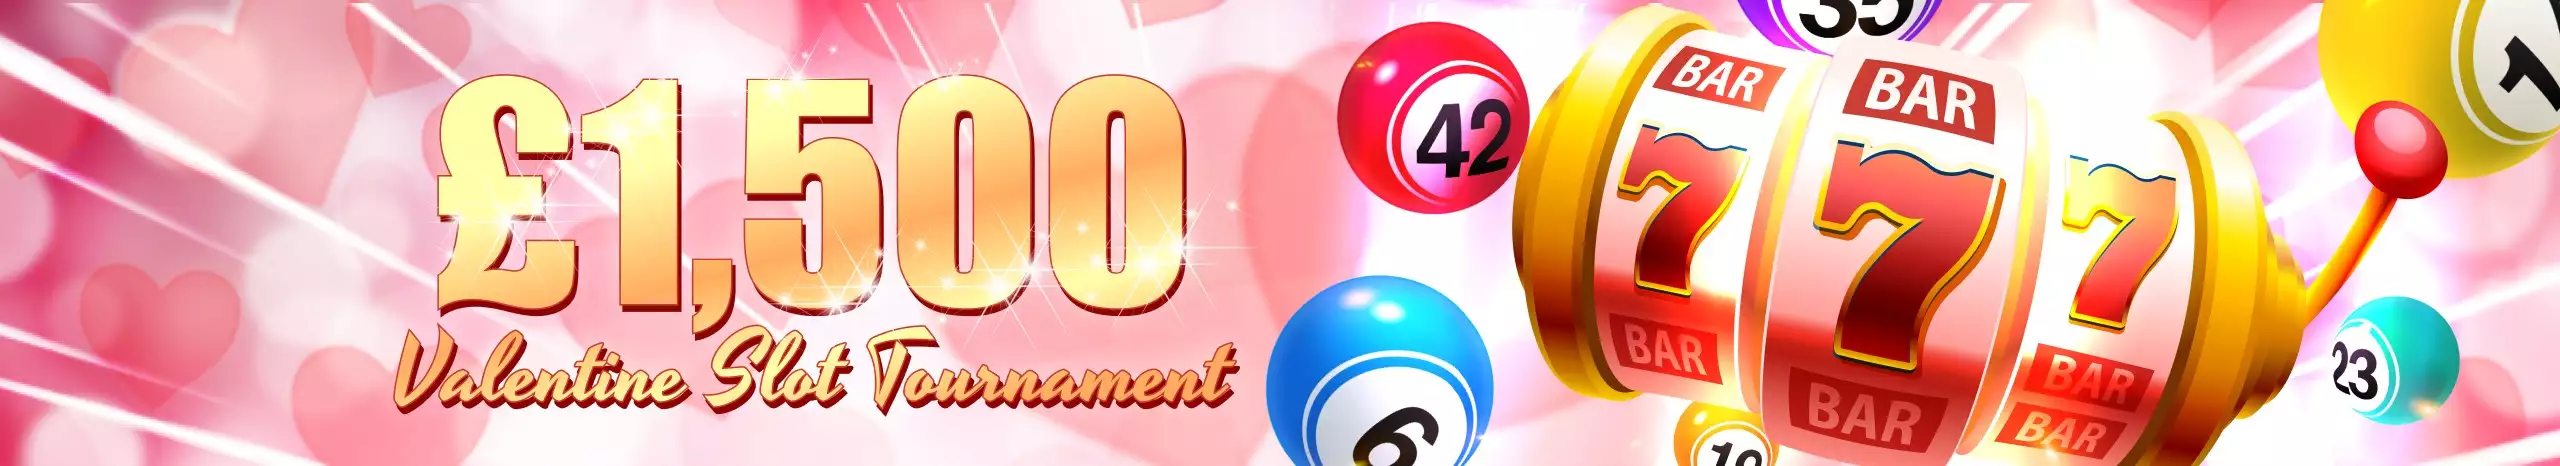 Bingo promotions at Bingo Ireland. We list Weekly & Monthly Promotions plus Special Bingo & Slot Offers. Check out Details Here!